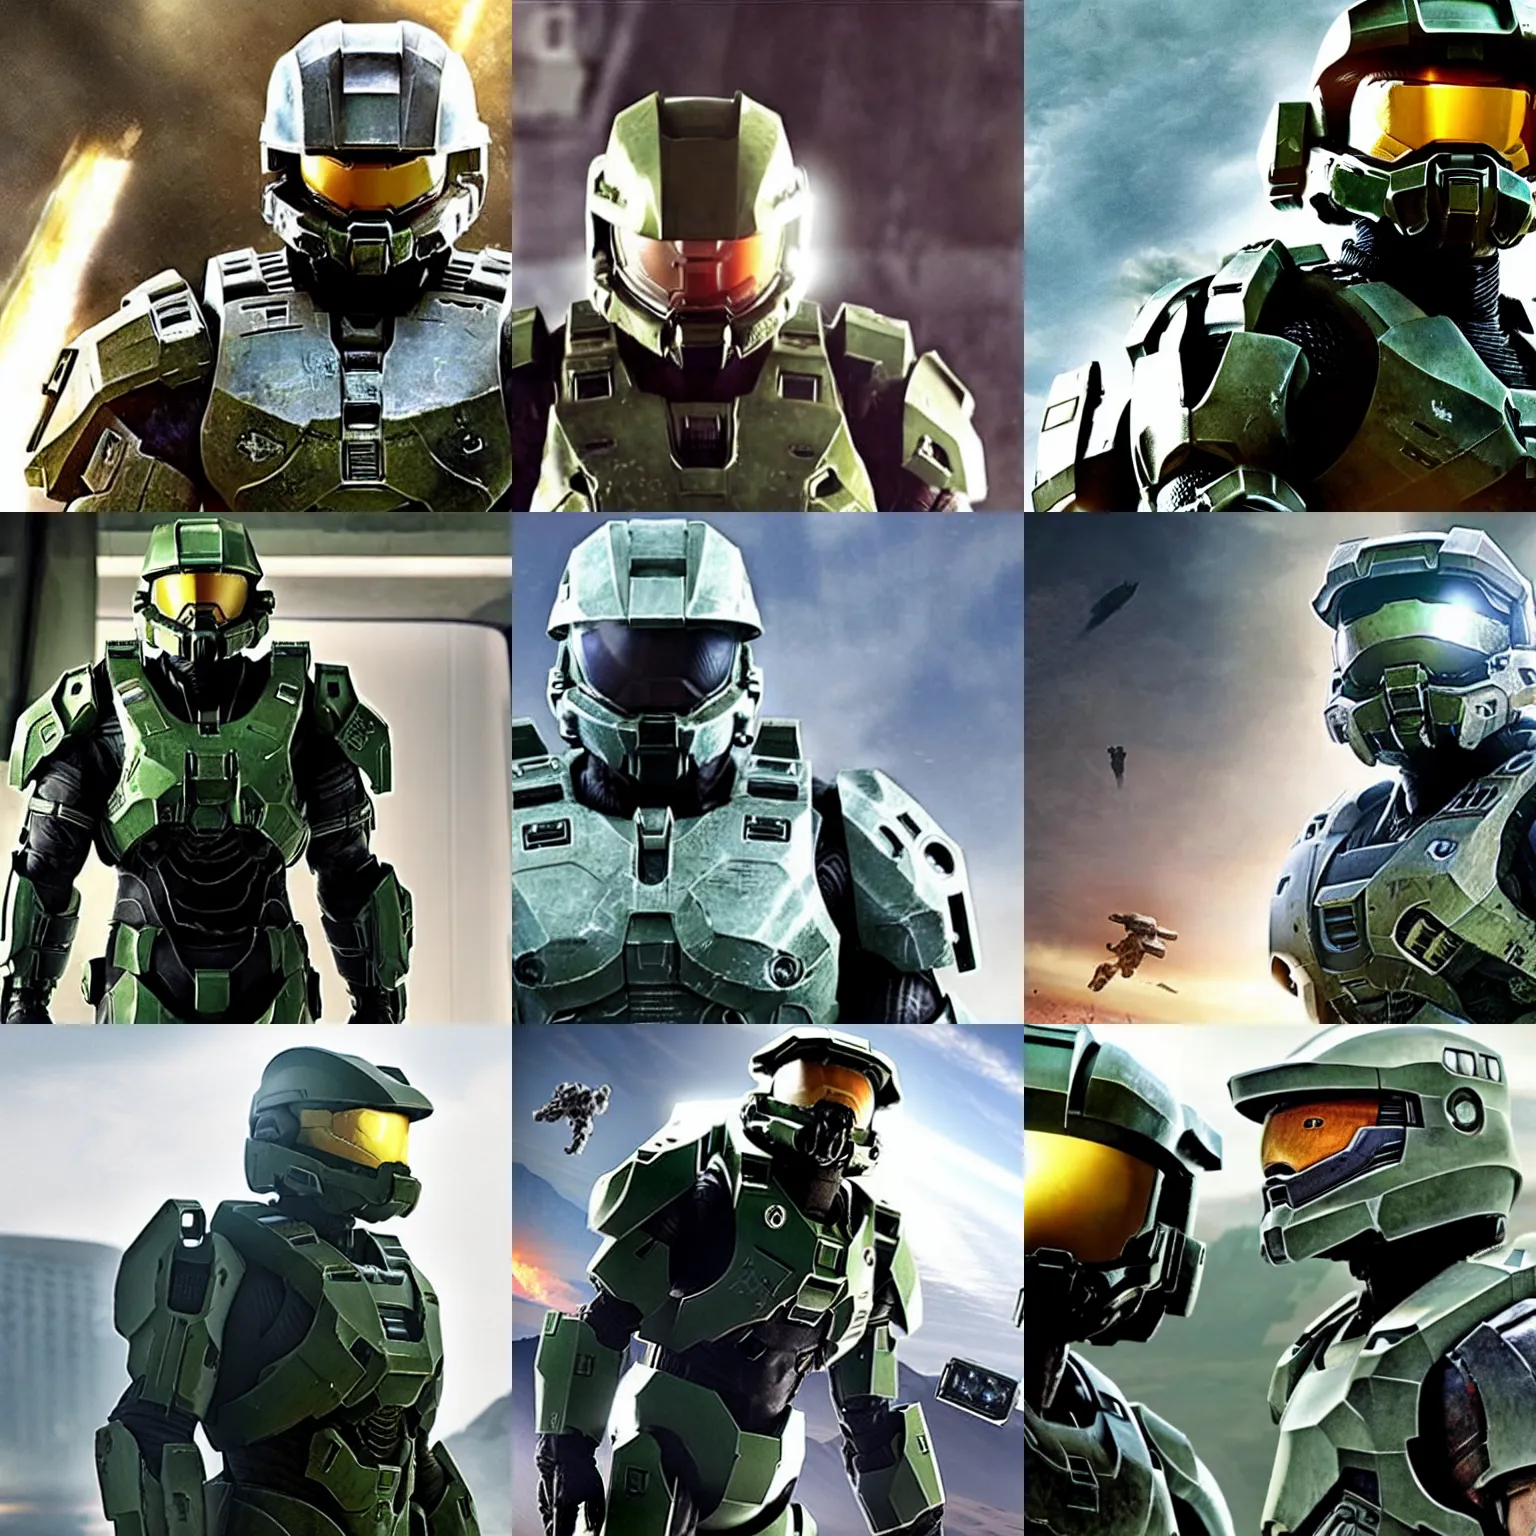 Prompt: bruce willis as master chief, helmet off, film still from new halo movie